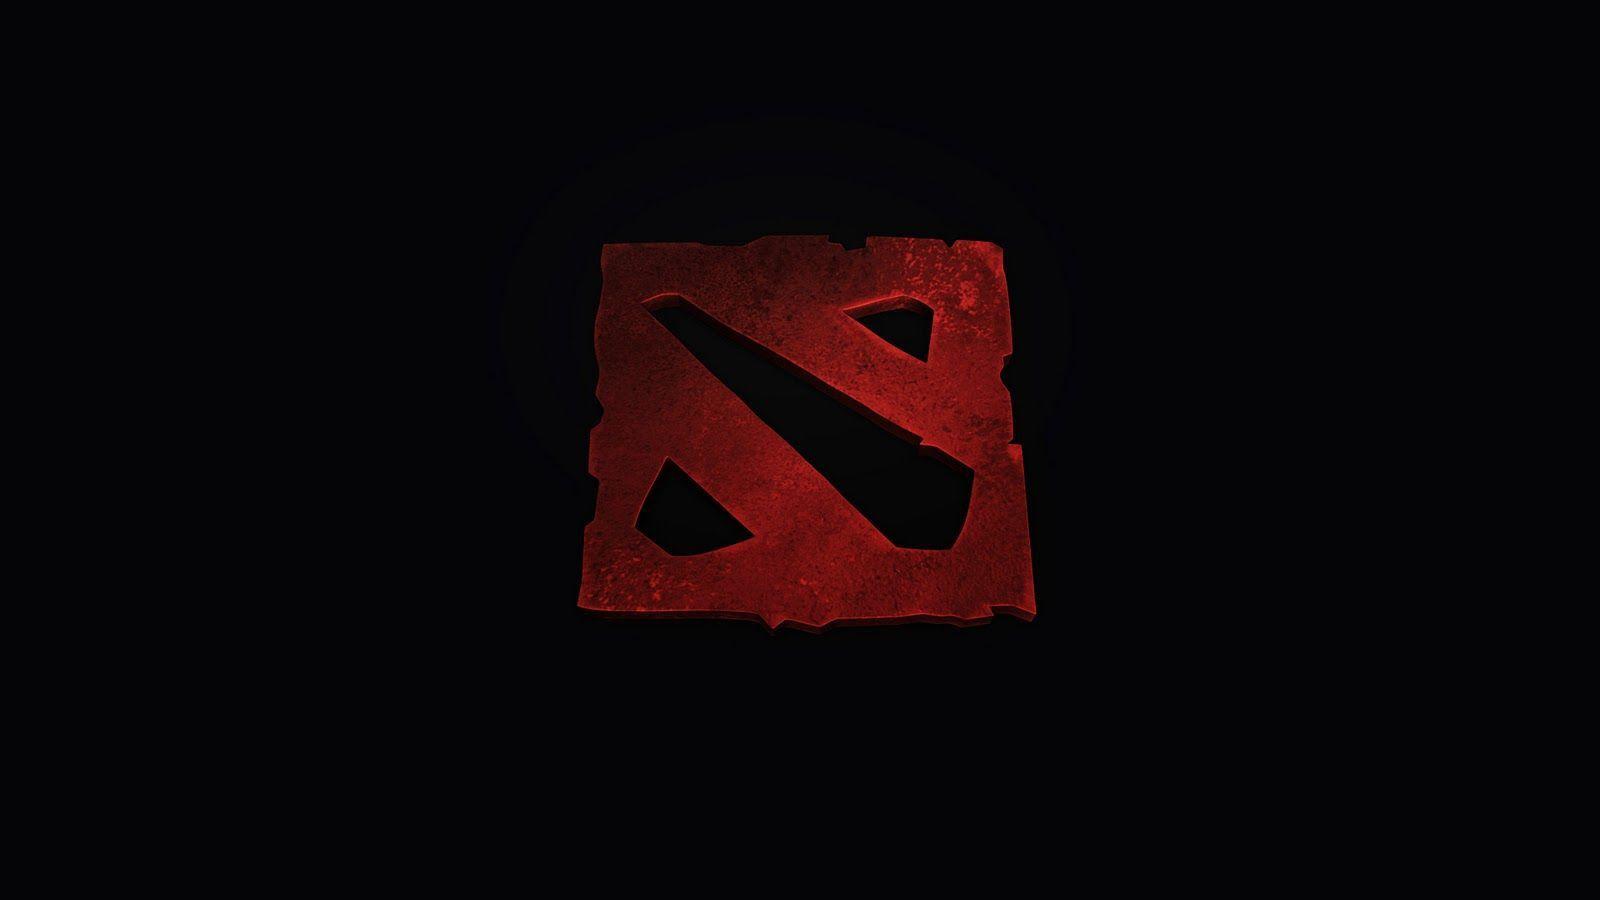 Dota 2 Logos HD Wallpaper in PC Games Free Download Is A Awesome B